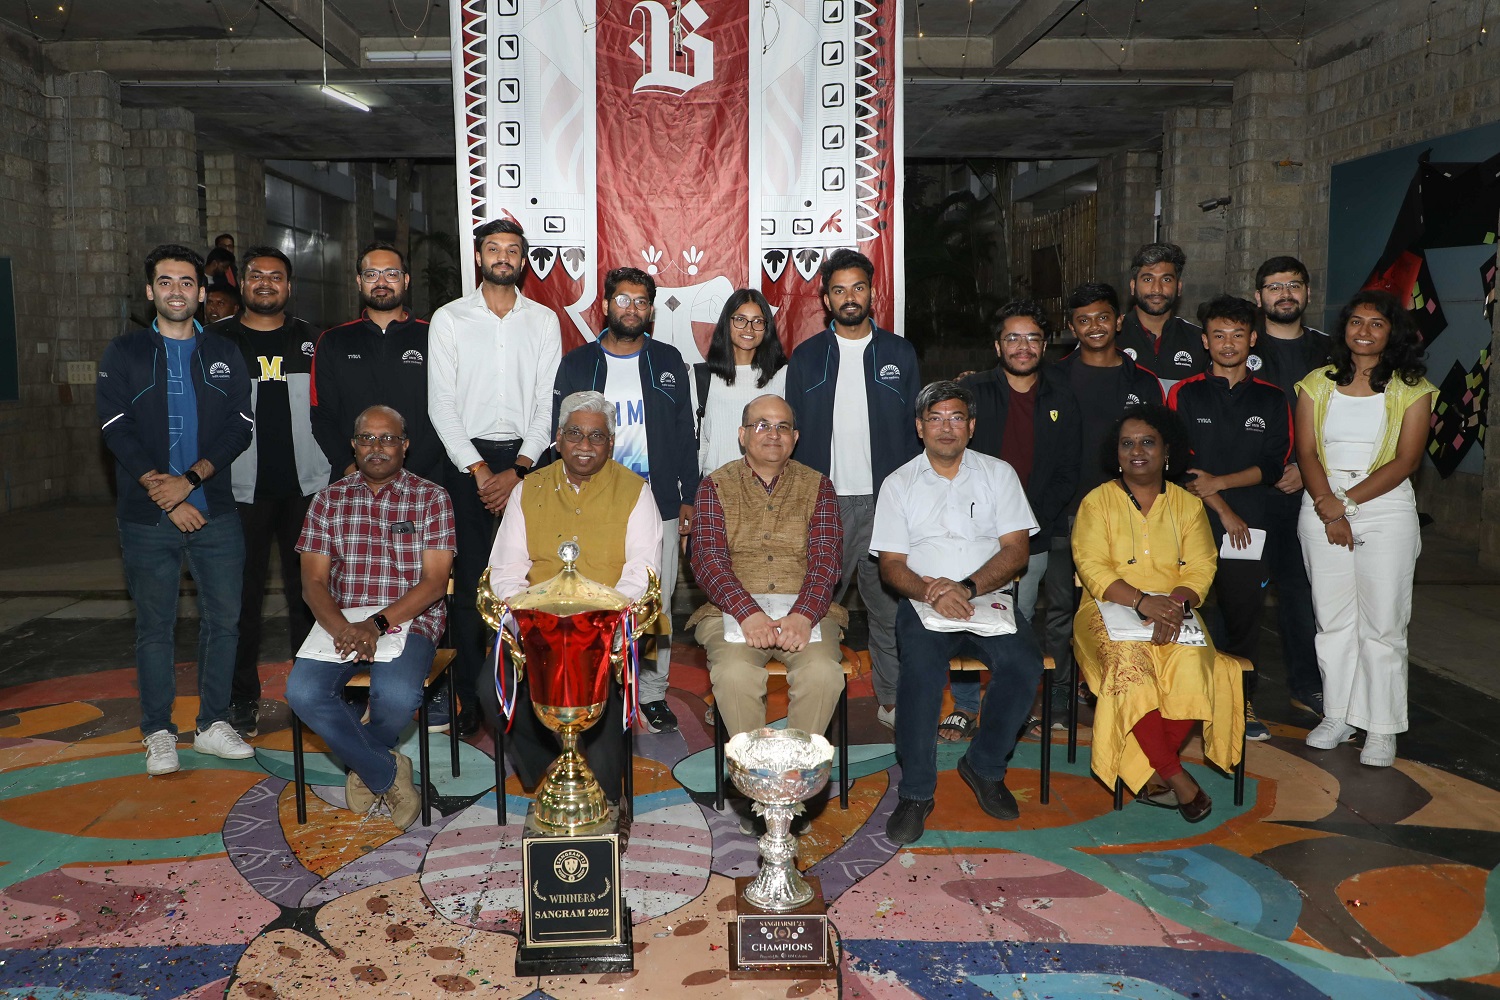 The young sports stars of IIMB lifted the inter-IIM sports trophy, having battled it out with teams from IIM Ahmedabad, IIM Calcutta and IIM Lucknow in ‘Sangharsh 2023’, in a variety of events ranging from cricket and badminton to basketball and table tennis, and more. The Director of IIMB, Prof. Rishikesha T Krishnan, Dean Administration Prof. Rajendra K Bandi, PGP Chairperson Prof. R Srinivasan, Chief Administrative Officer Col (Retd.) SD Aravendran and Hostel Officer Komala Devi cheered the winners.